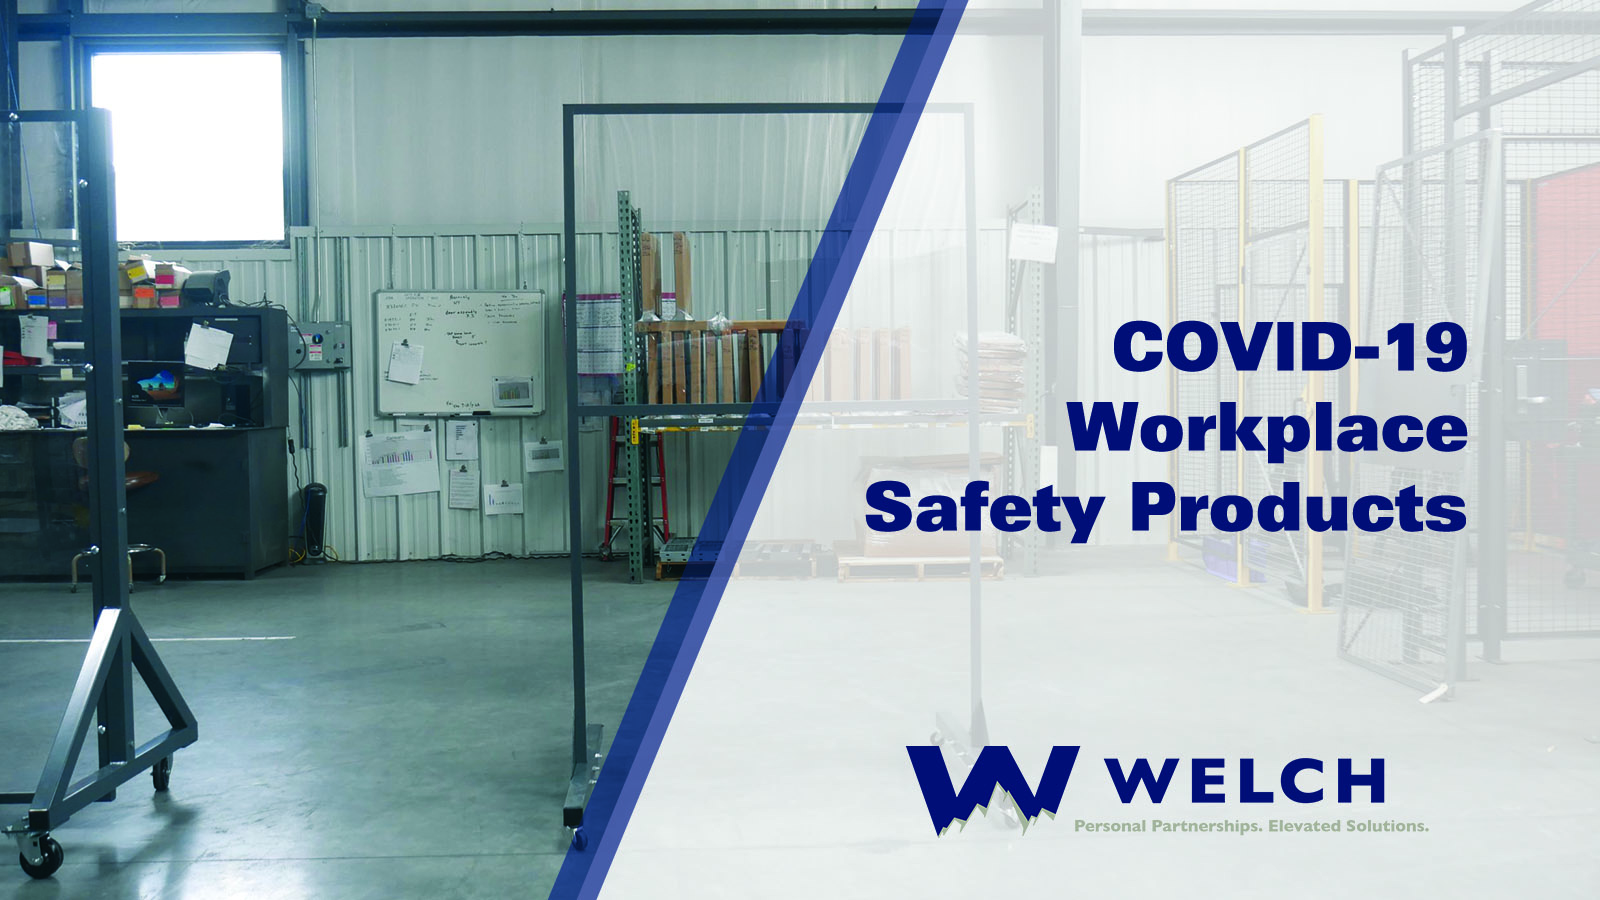 COVID-19 Workplace Safety Products 2